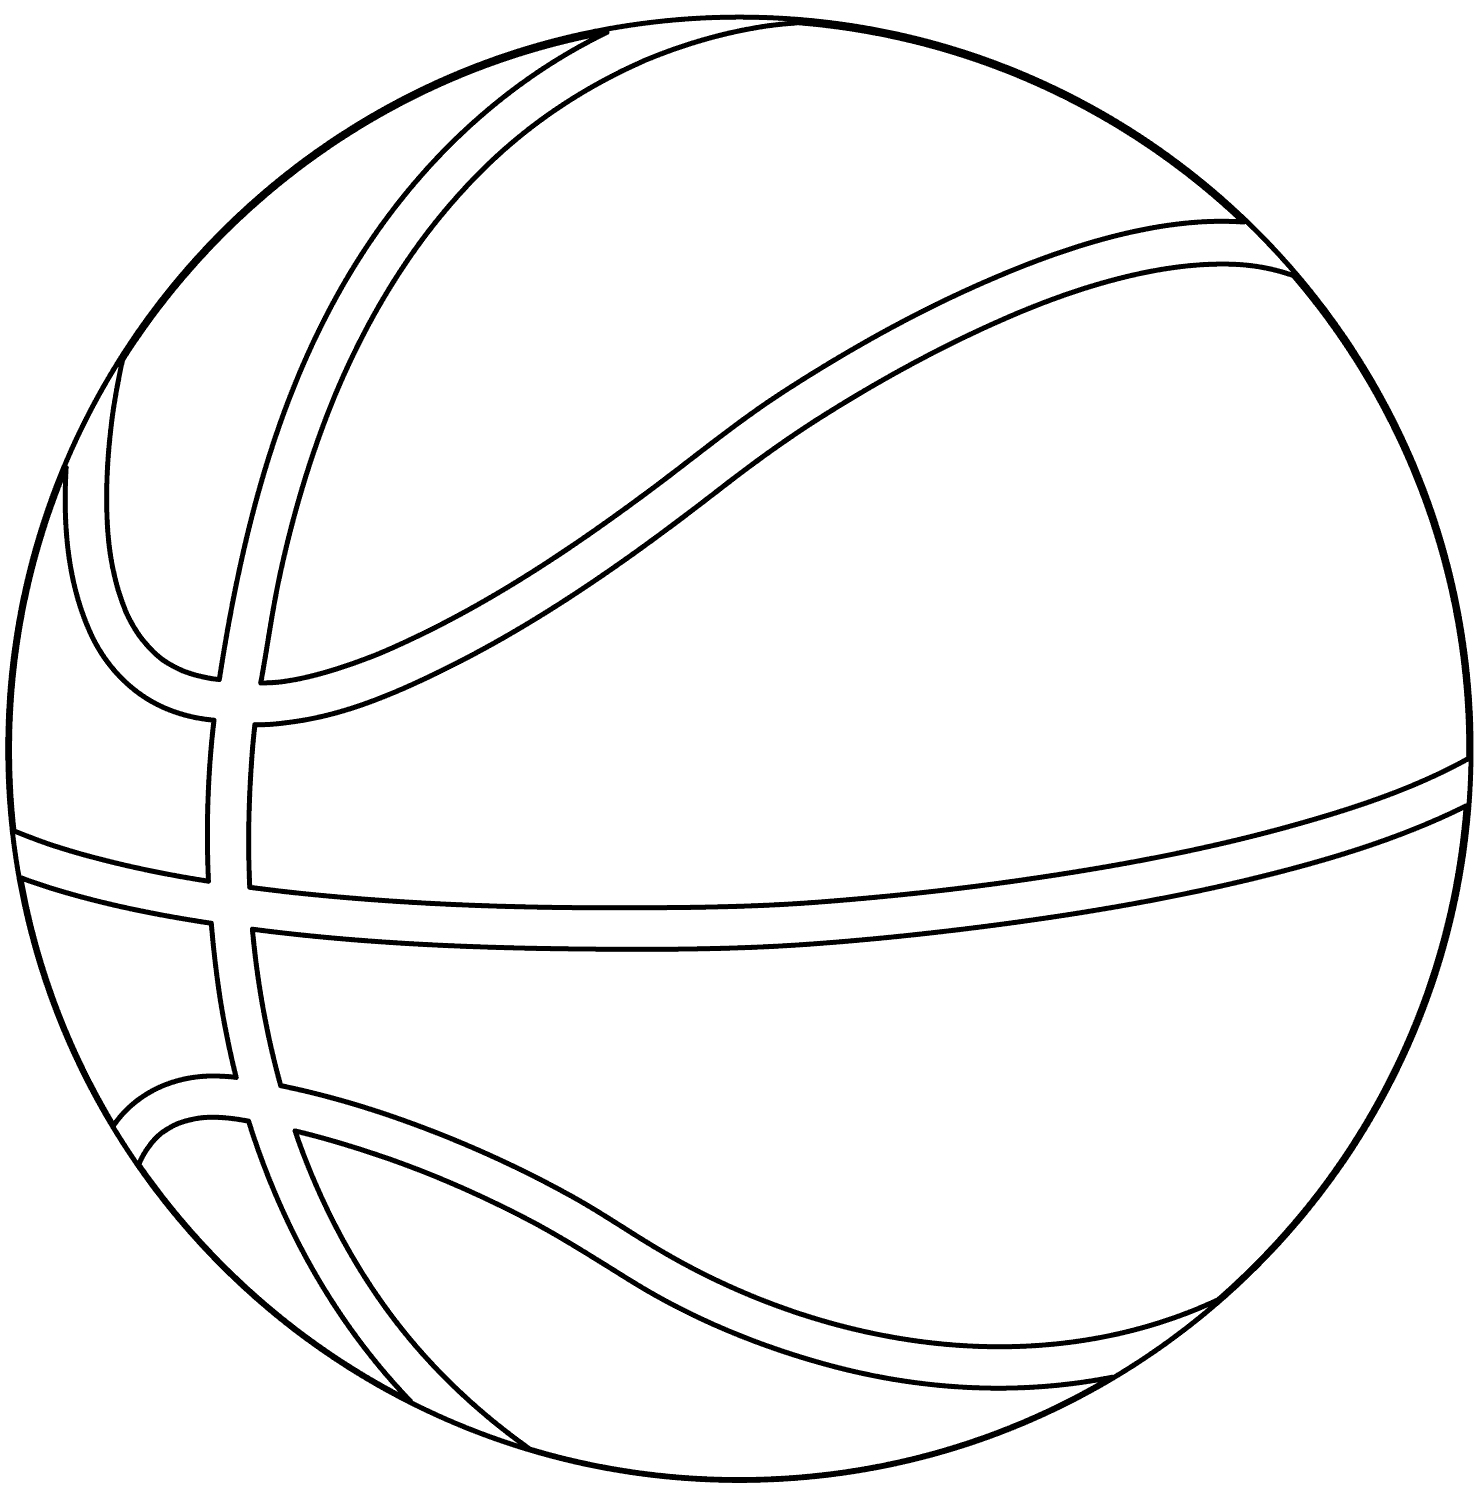 Basketball Ball Coloring Page Free Printable Coloring Pages for Kids